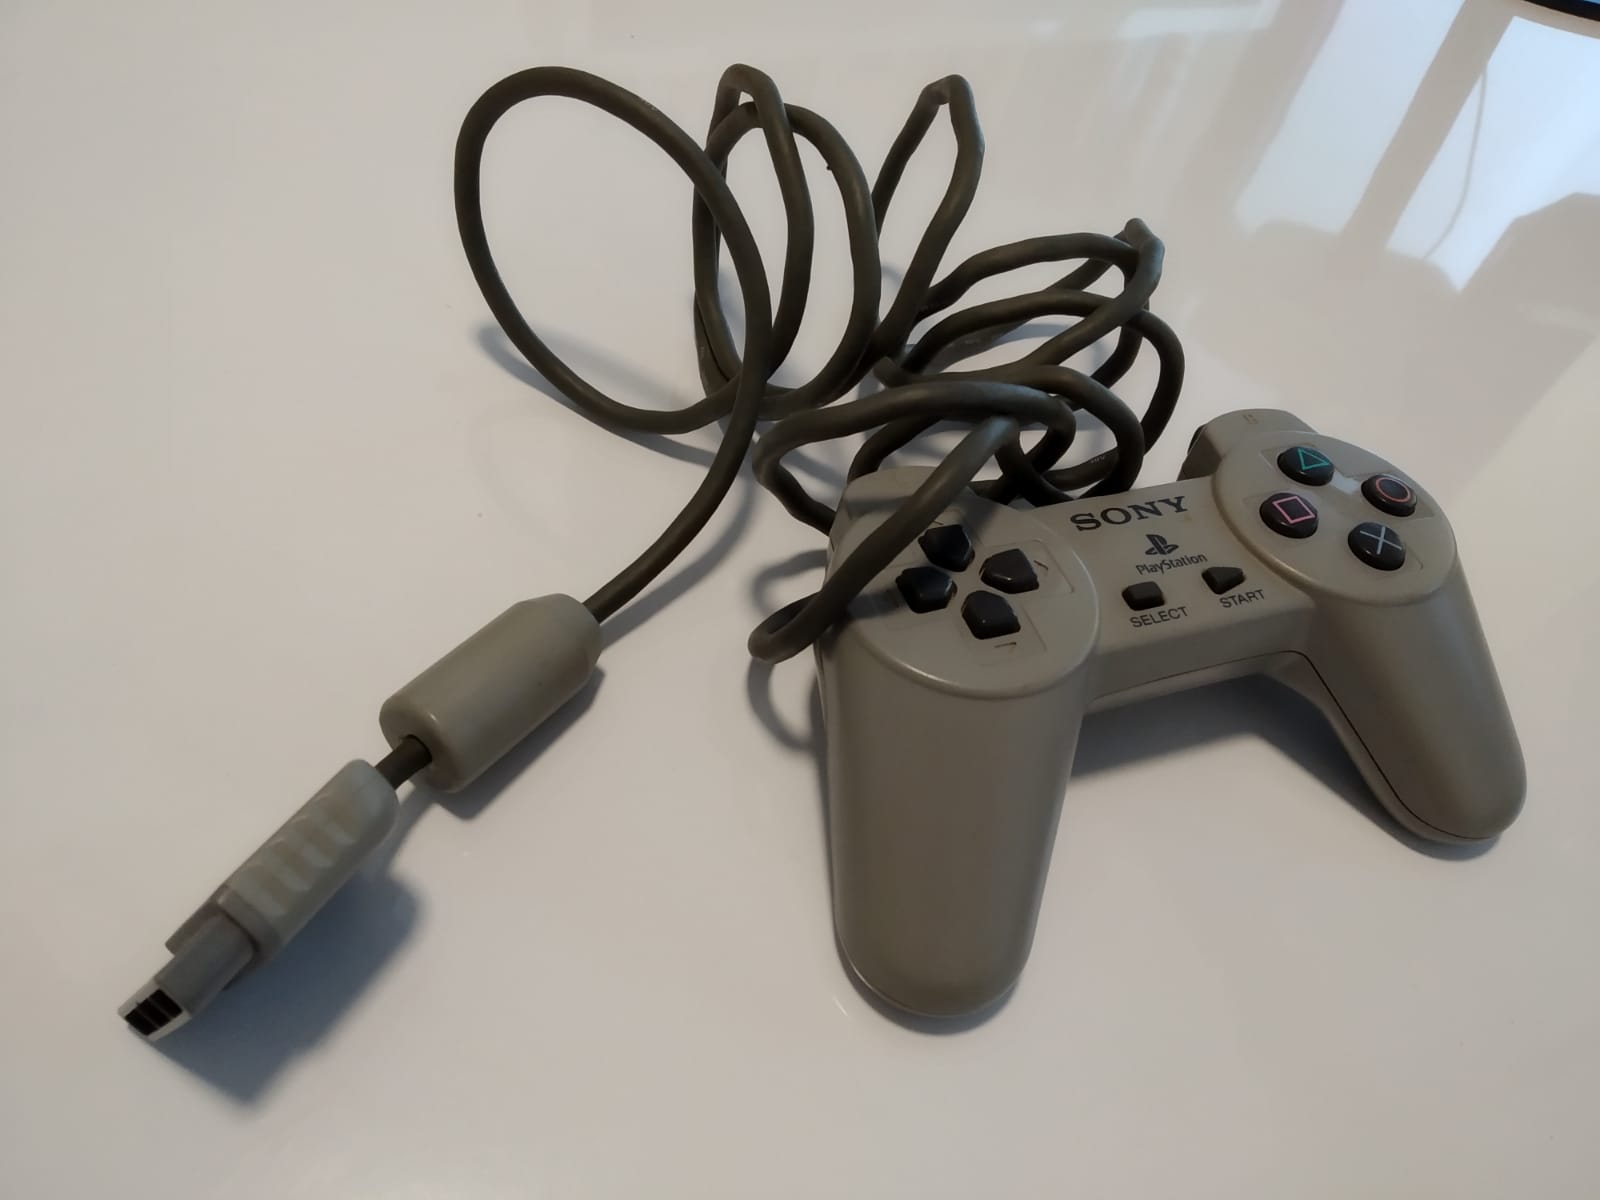 My ancient PS1 controller